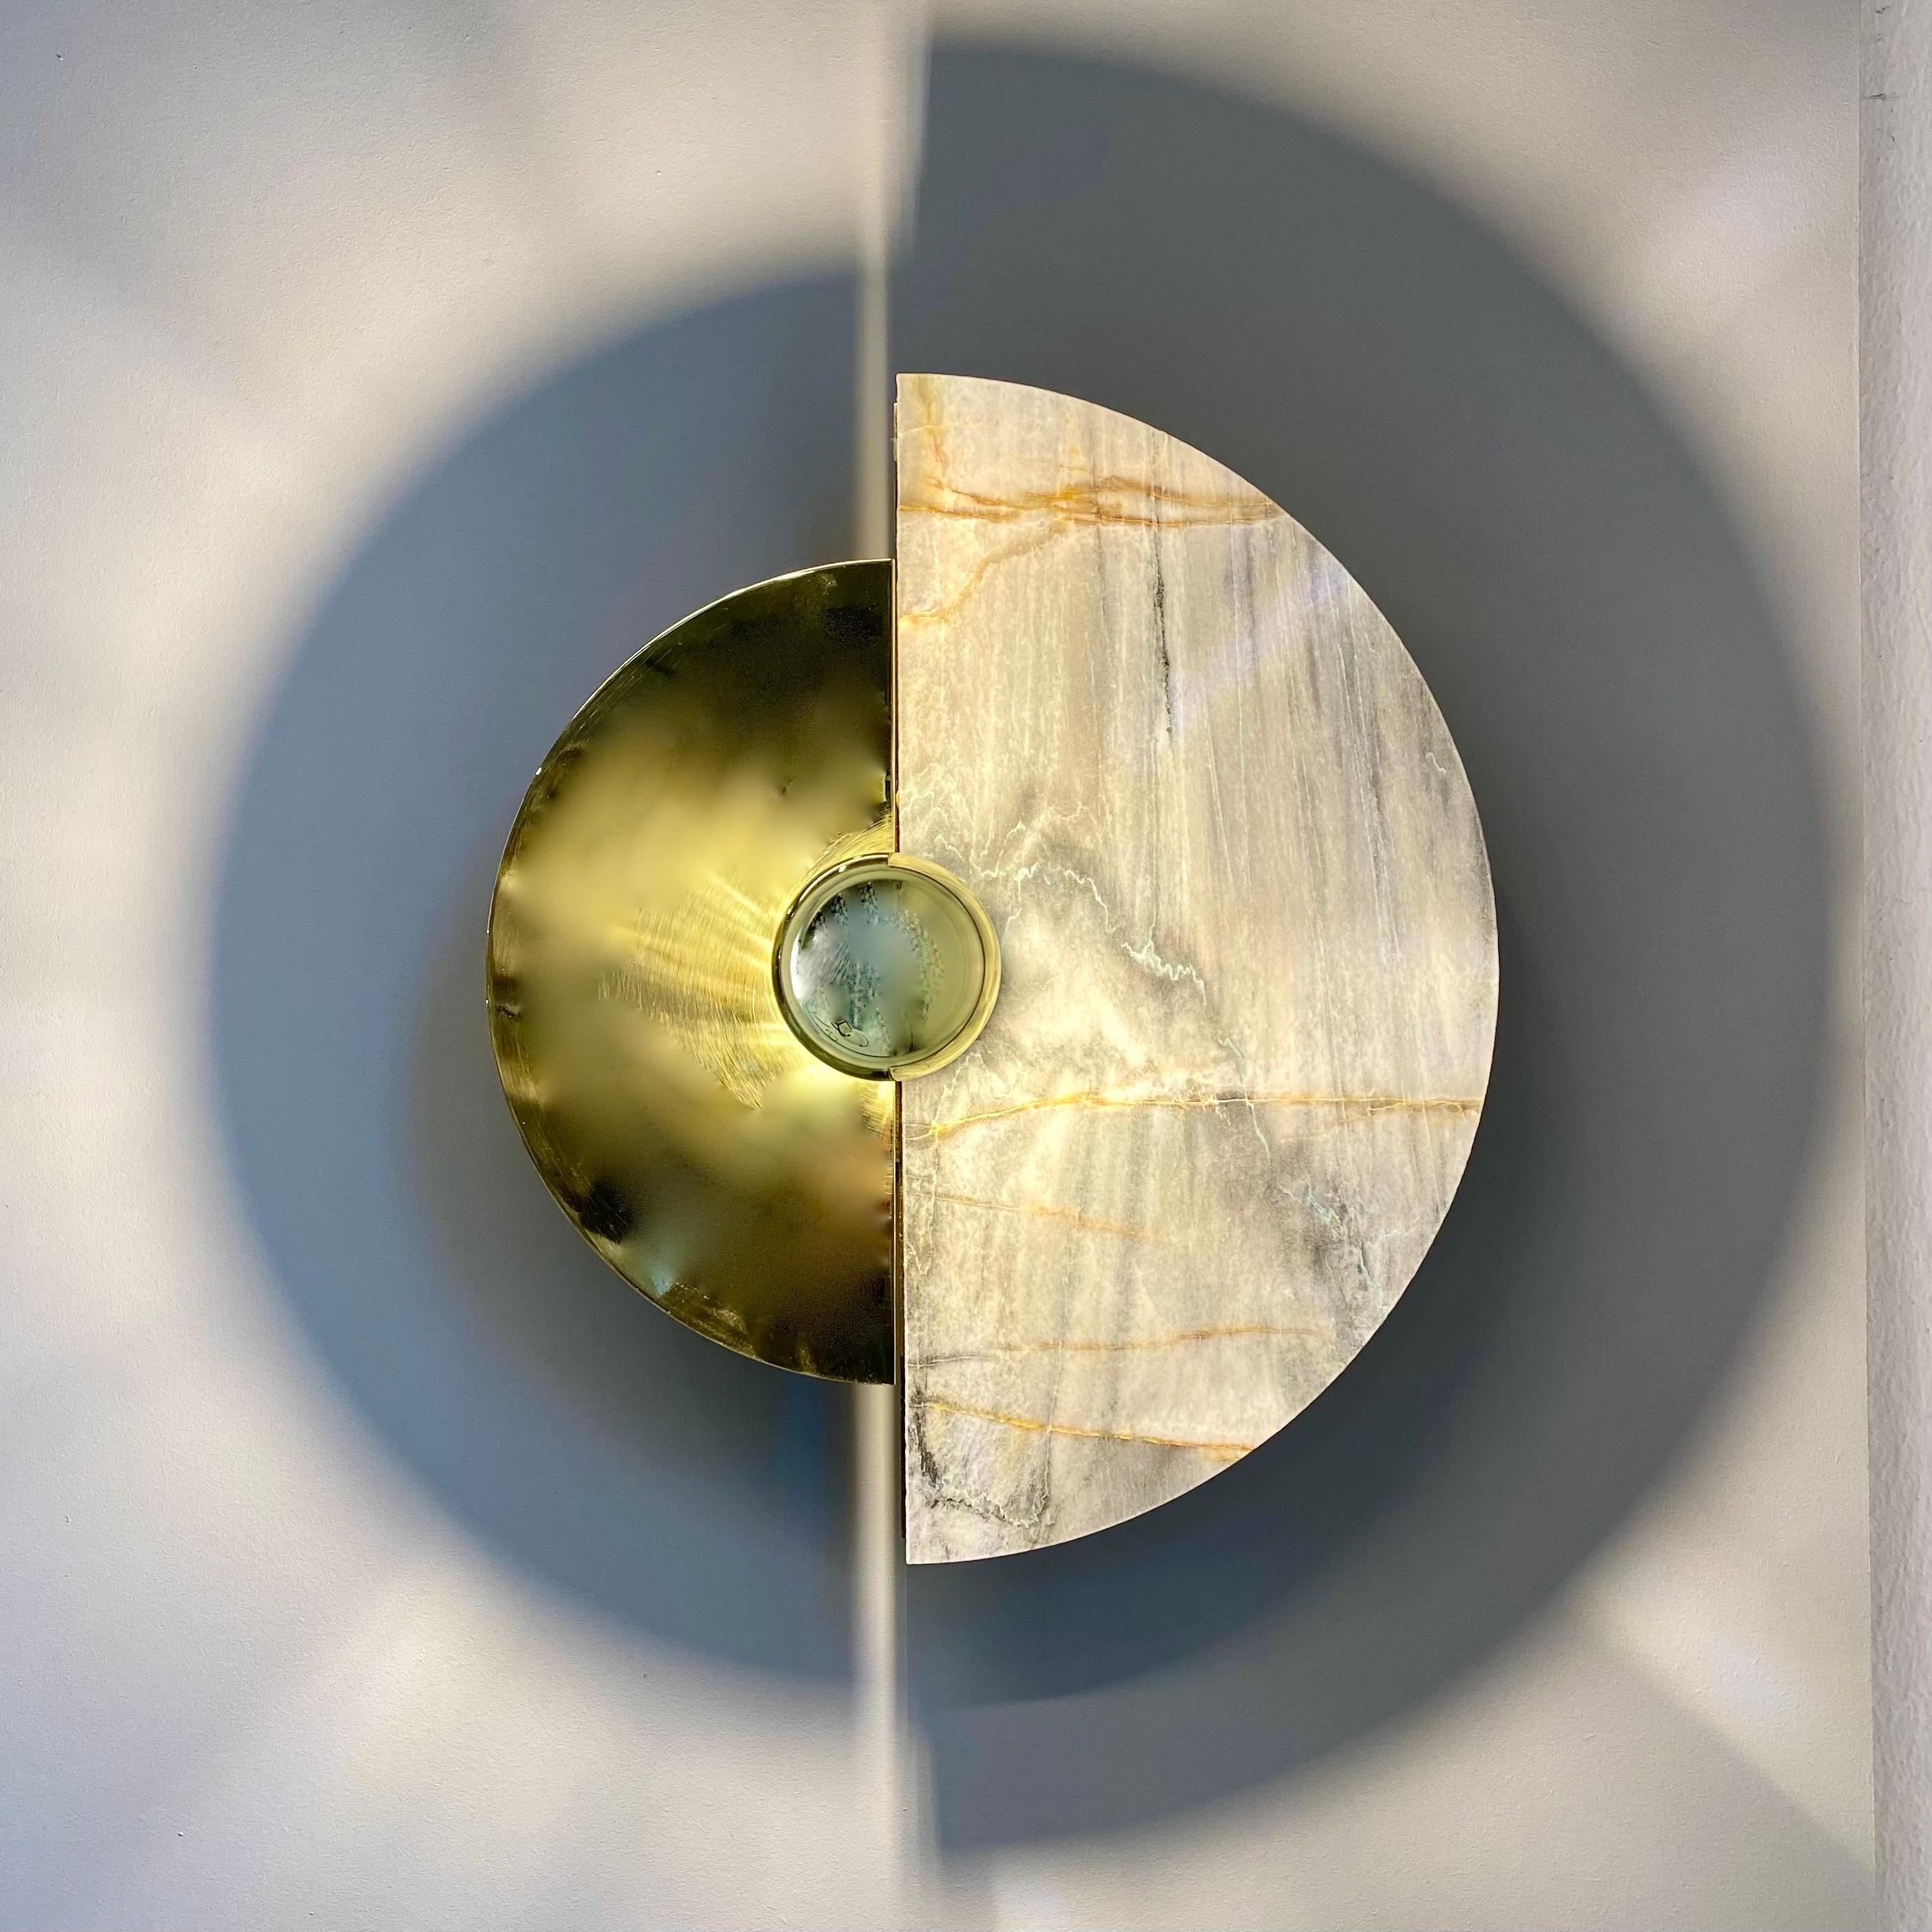 The Levante wall sconce with its circular shape is a strong reference to the sun. 
This design element gives the sconce an artistic and symbolic quality that can add interest and meaning to the decor of a room. The circular shape is often